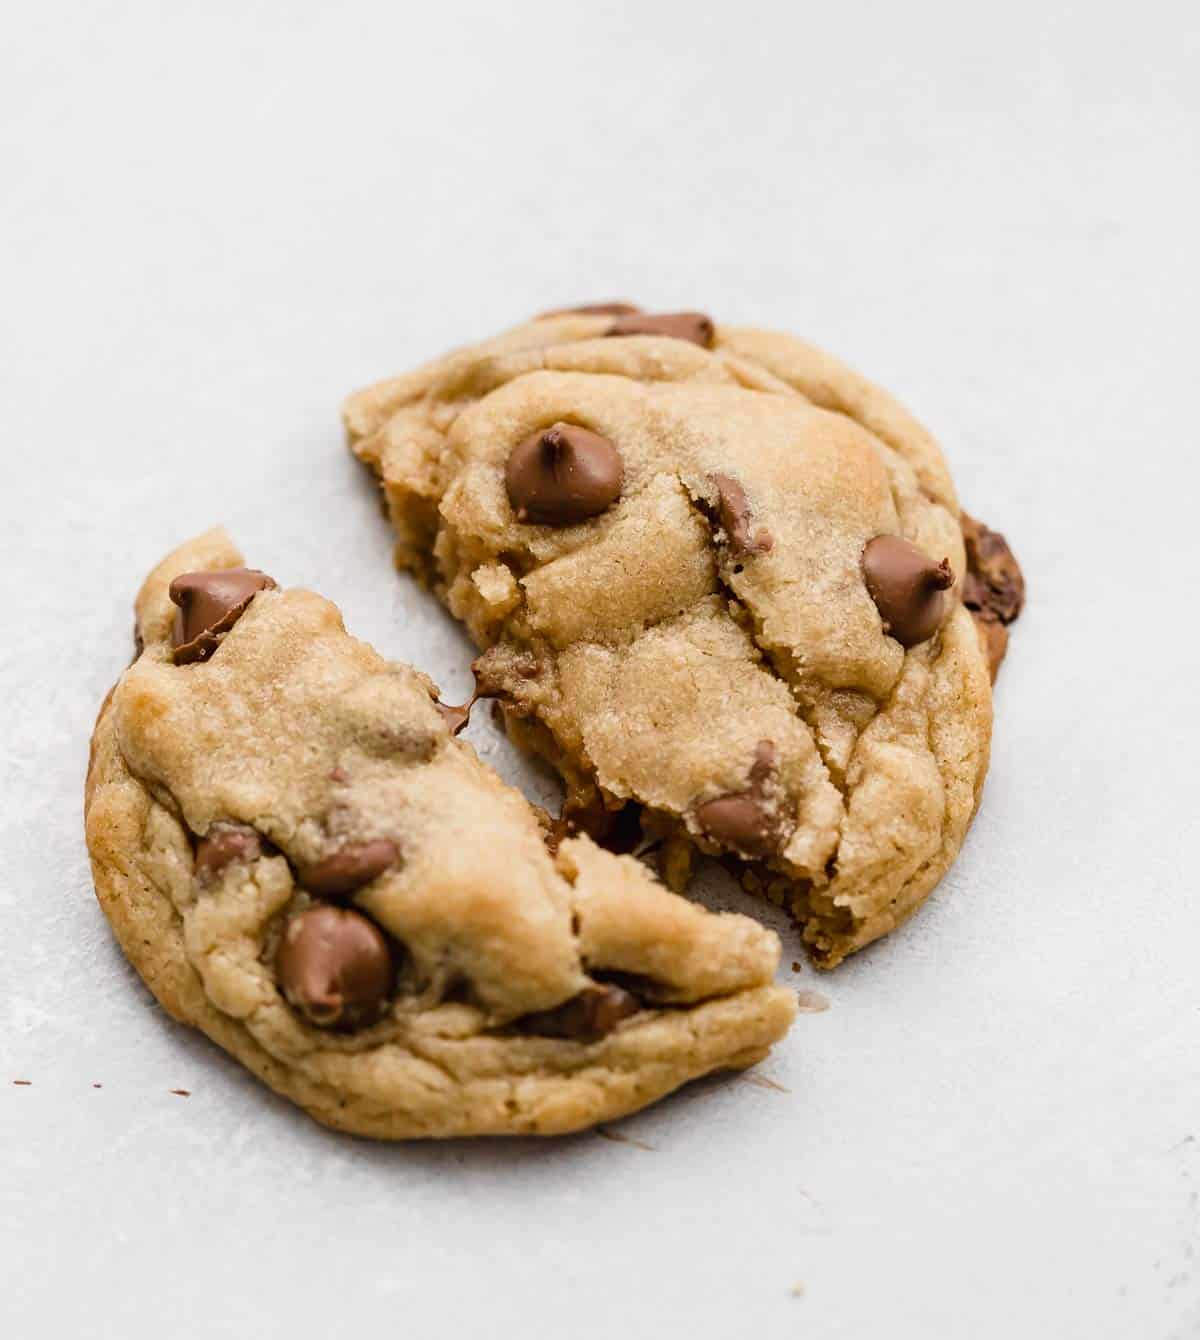 A copycat Crumbl Chocolate Chip Cookie broken in half on a white background.